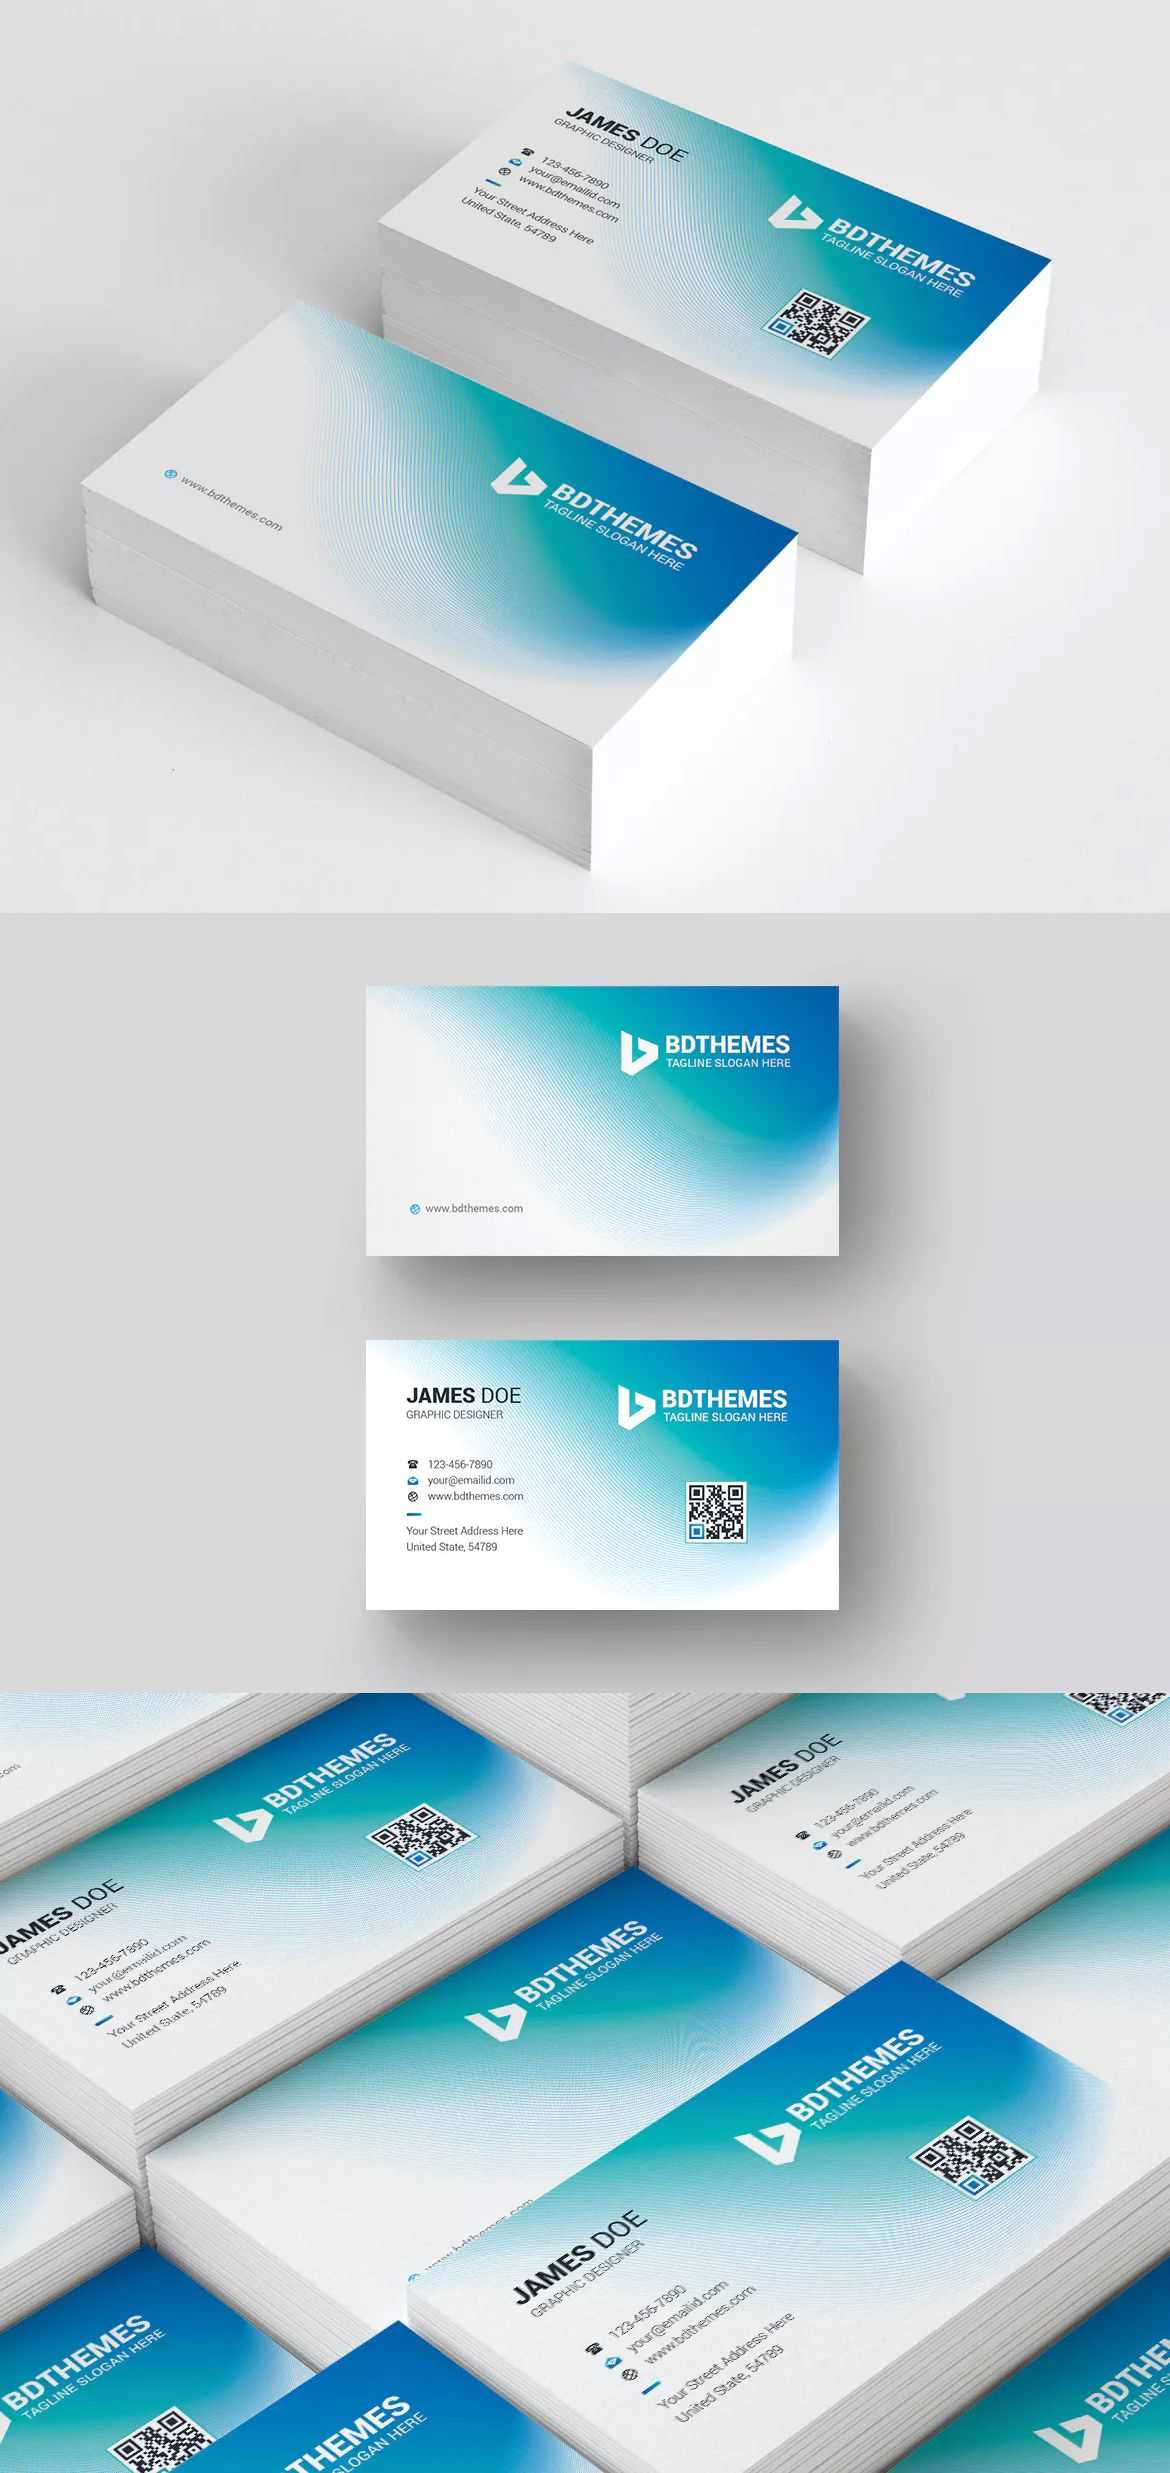 046 Business Card Template Ai Ideas Incredible Design Intended For Adobe Illustrator Card Template